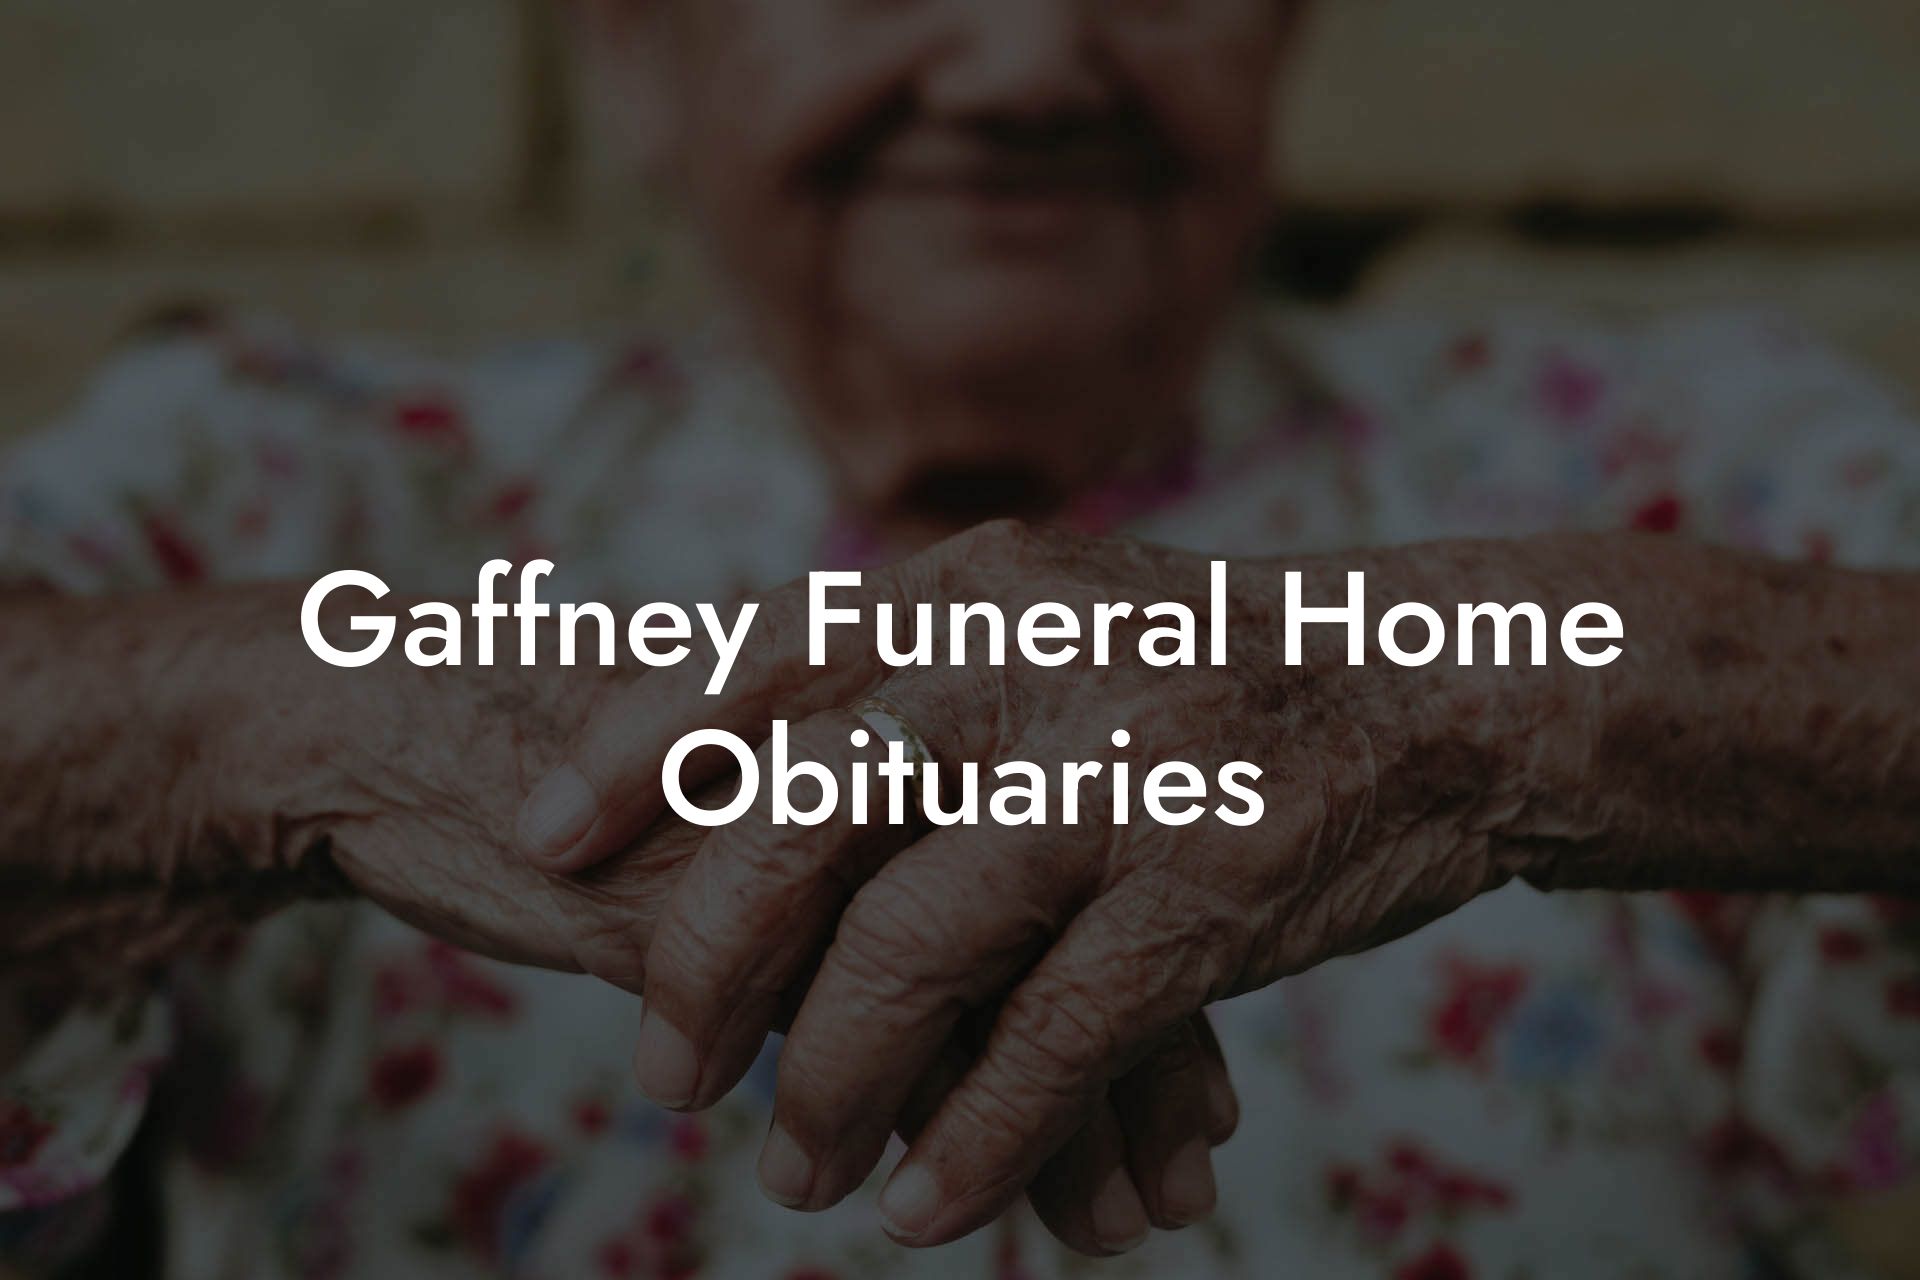 Gaffney Funeral Home Obituaries